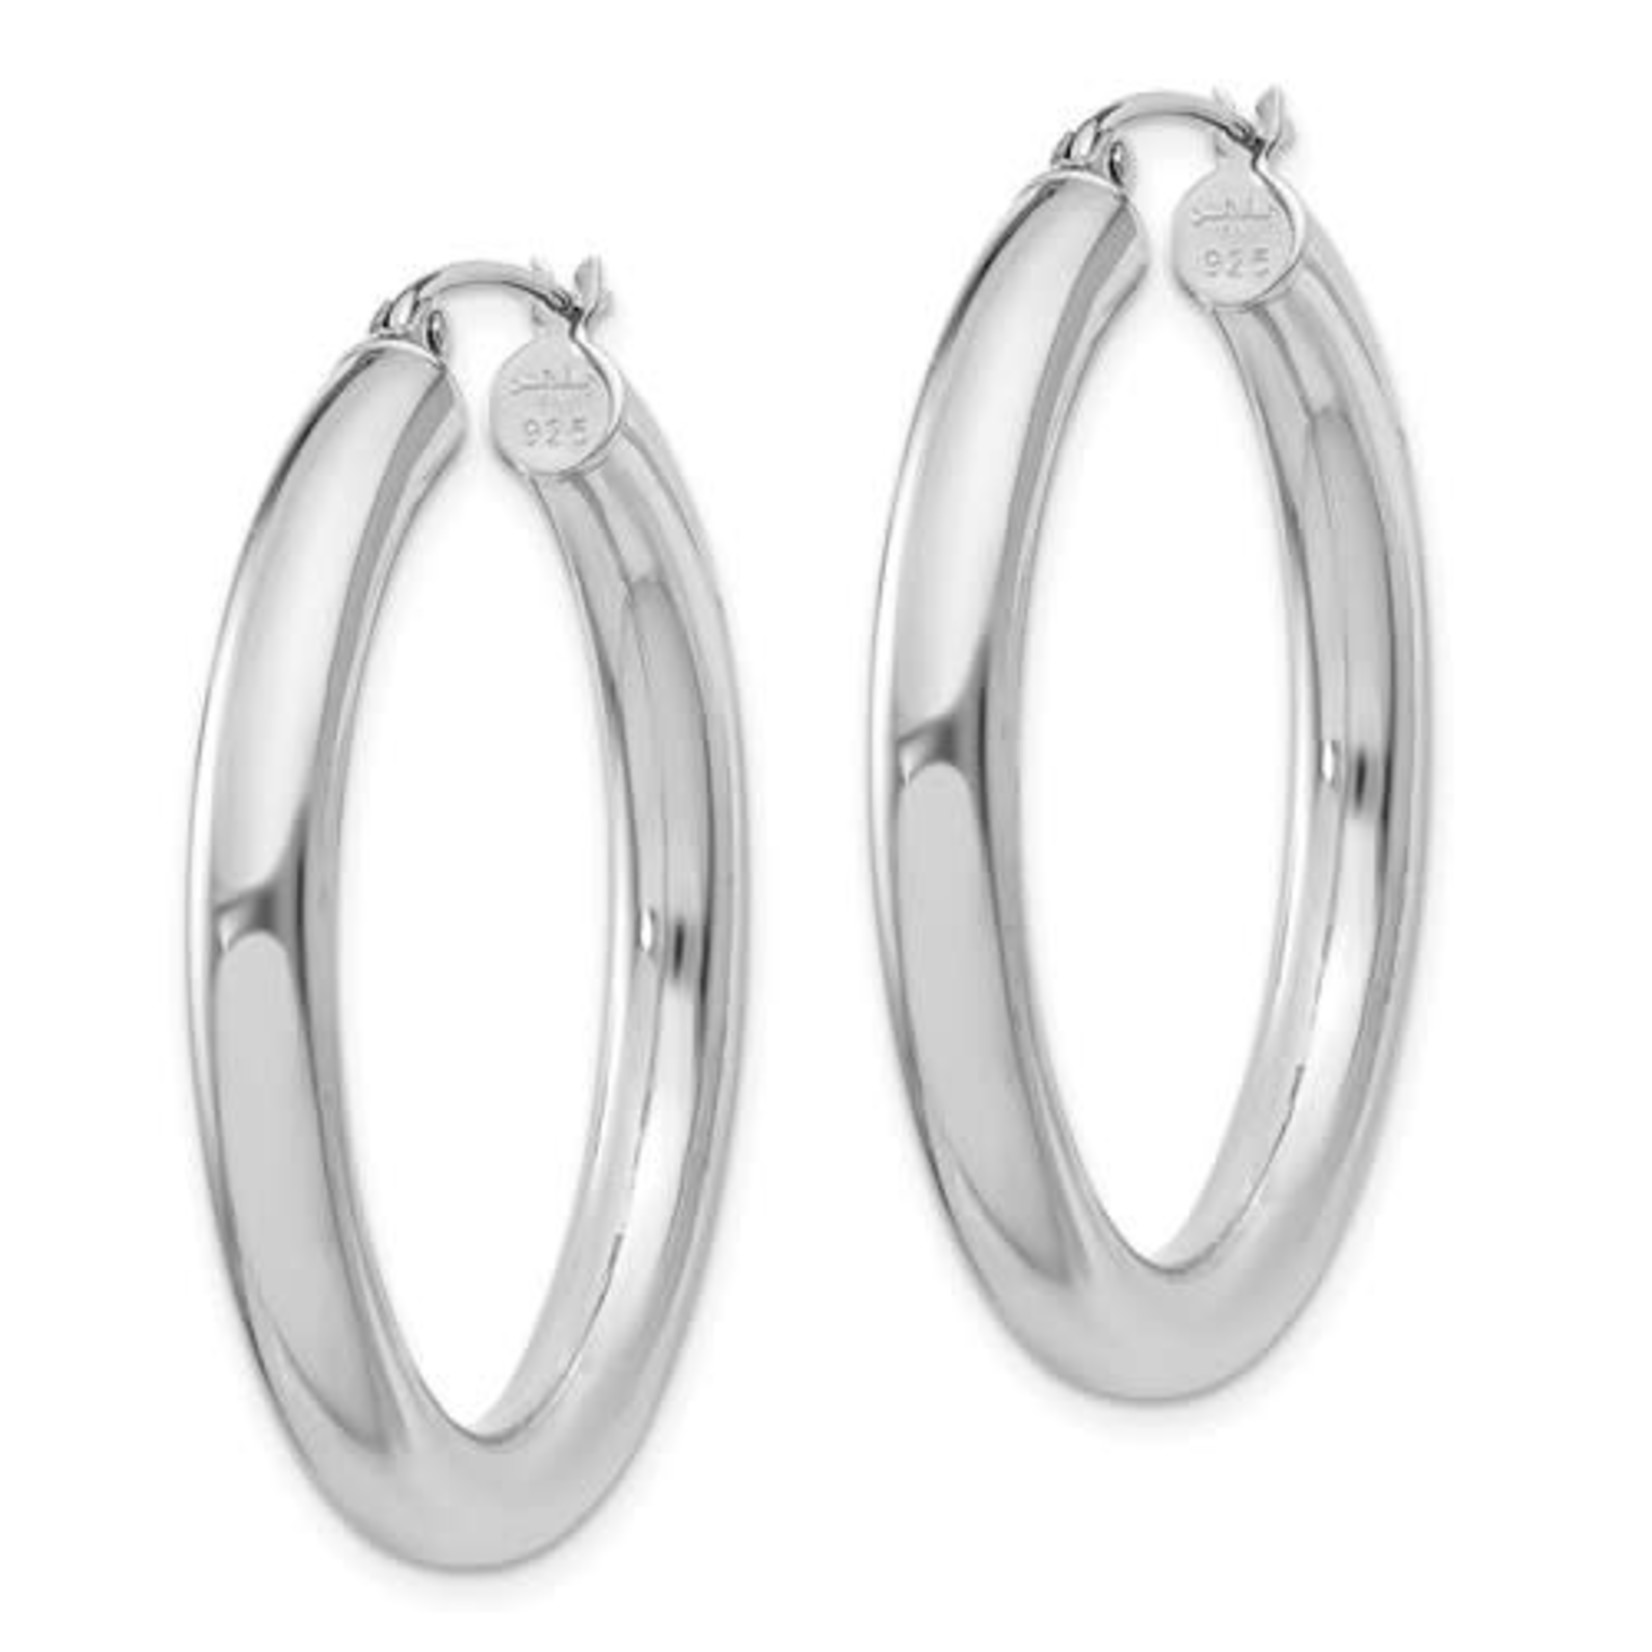 This Is Life Sterling Silver Rhodium-plated 4mm Round Hoop Earrings